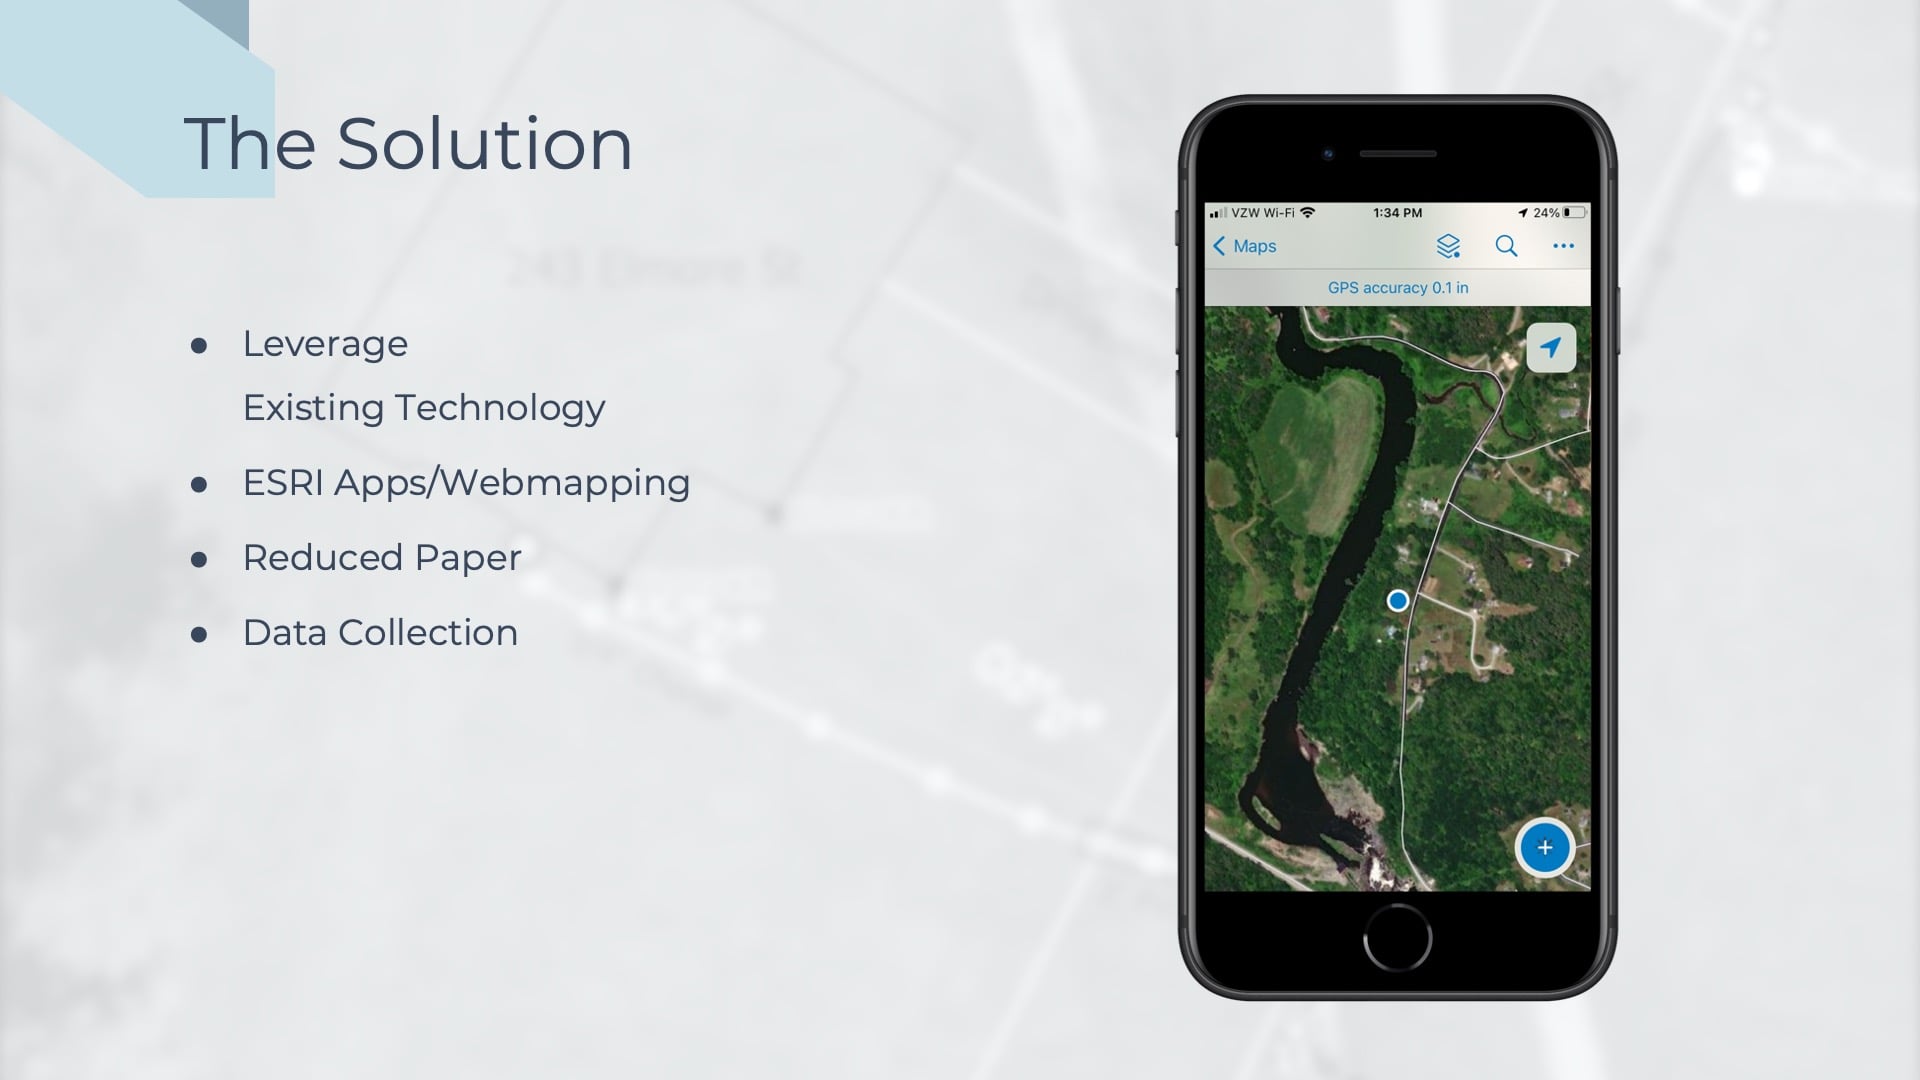 "The Solution" explanation continues, showing a screenshot of ArcGIS Field Maps data collection app on the right. Vermont Gas Systems wanted to leverage mobile mapping apps. The vision was to equip field crews with all technology they needed to edit, create, and maintain data in real time.